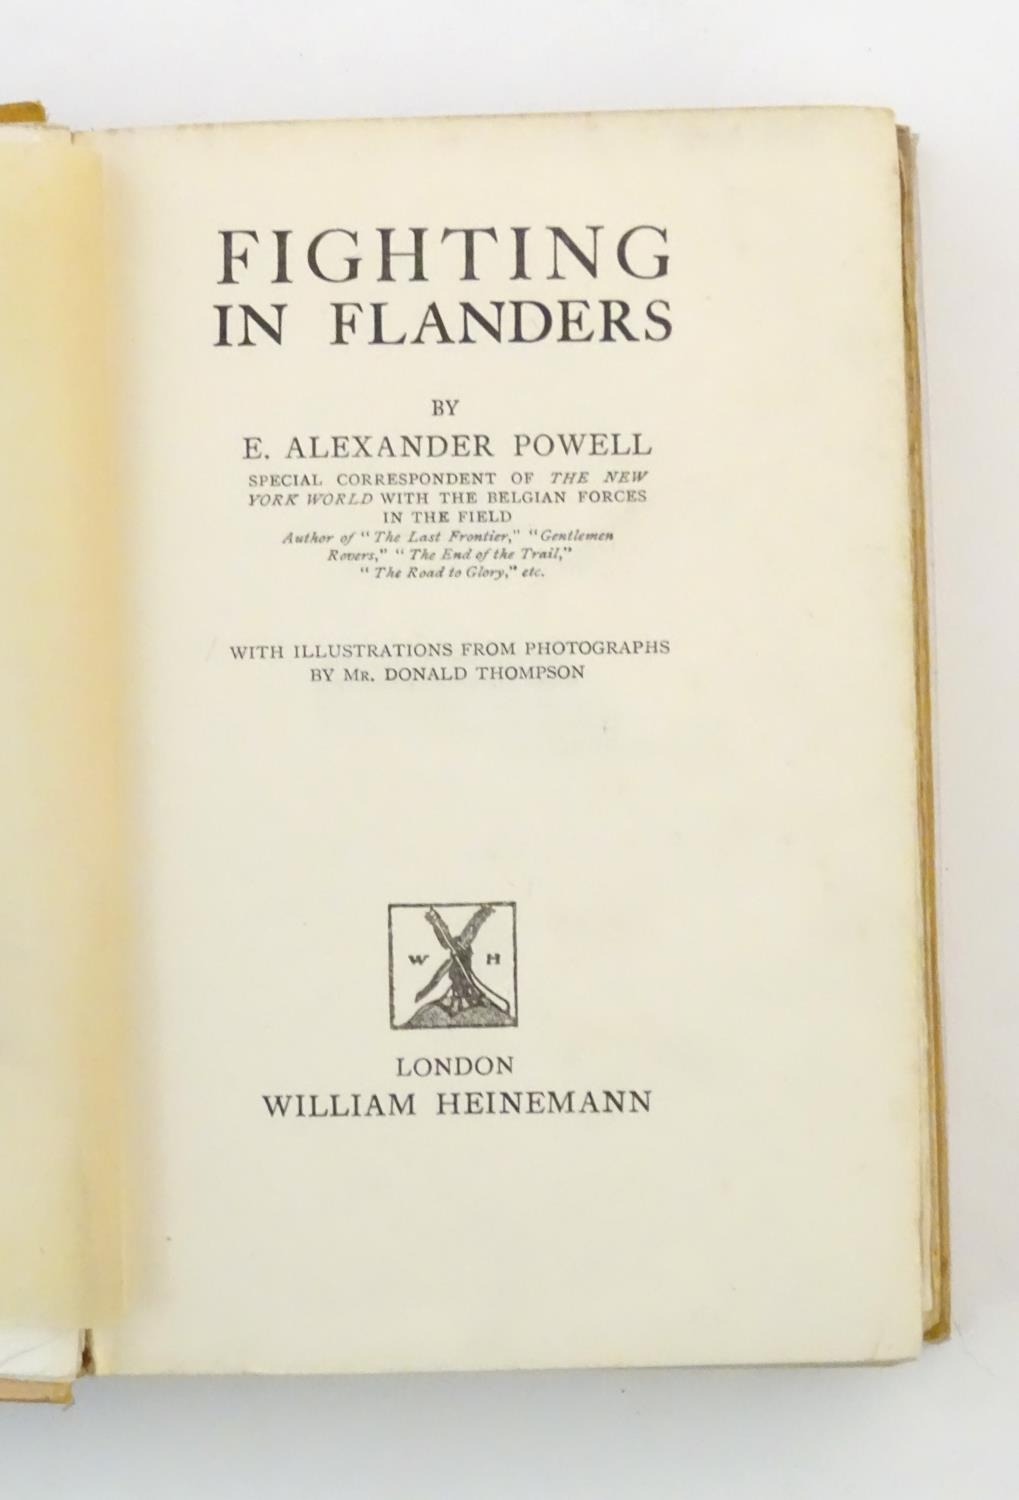 Book: Fighting in Flanders by E. Alexander Powell with illustrations from photographs by Donald - Image 4 of 6